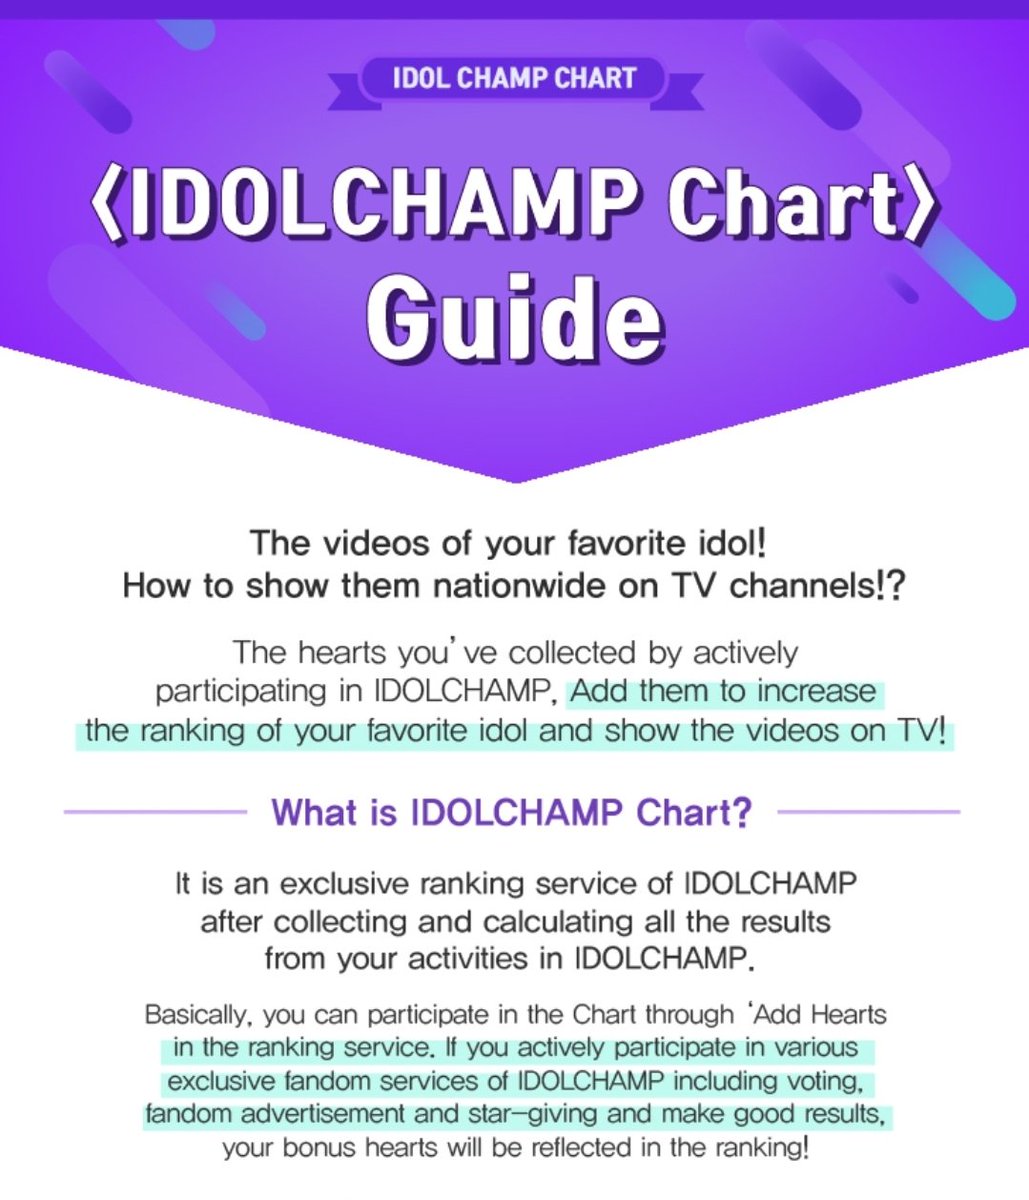 Voting for  @GOT7Official  #GOT7   in Idol Champ has a REAL WORLD impact for our boys! Show Champion votes = music show points towards a win! Individual banners and ads and magazine photoshoots or KARA donations with star giving events! If we win the monthly chart, we get TV ADS.